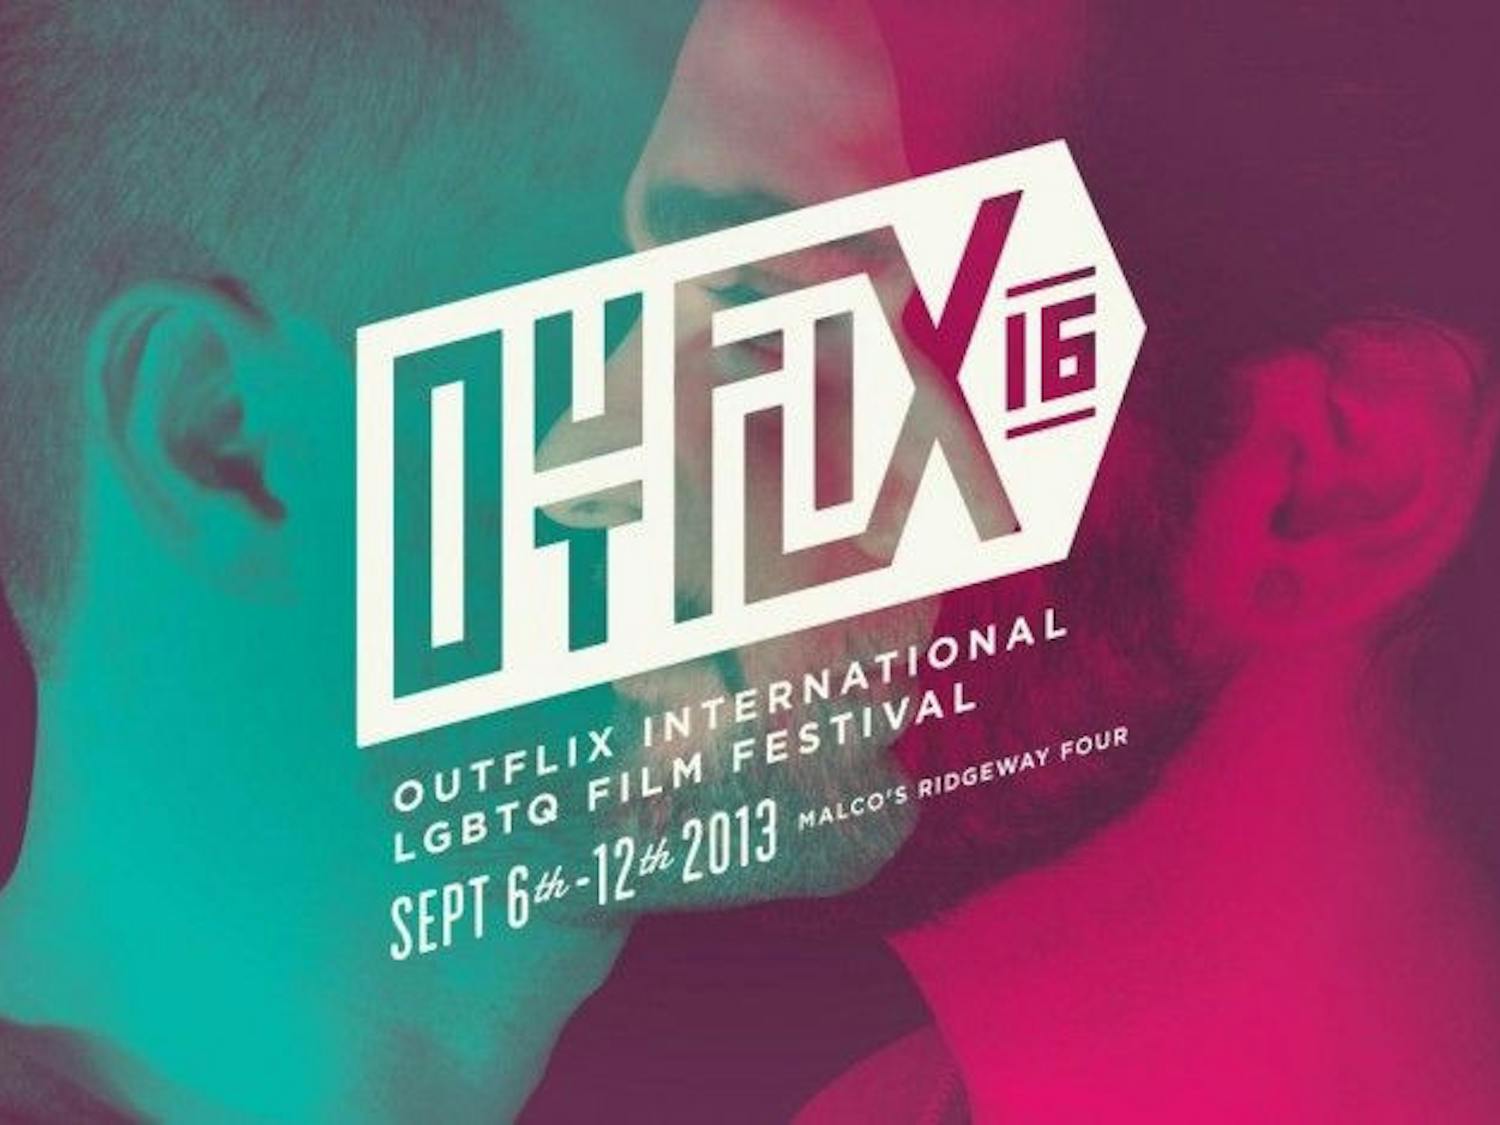 Outflix film festival puts LGBT stories on the big screen